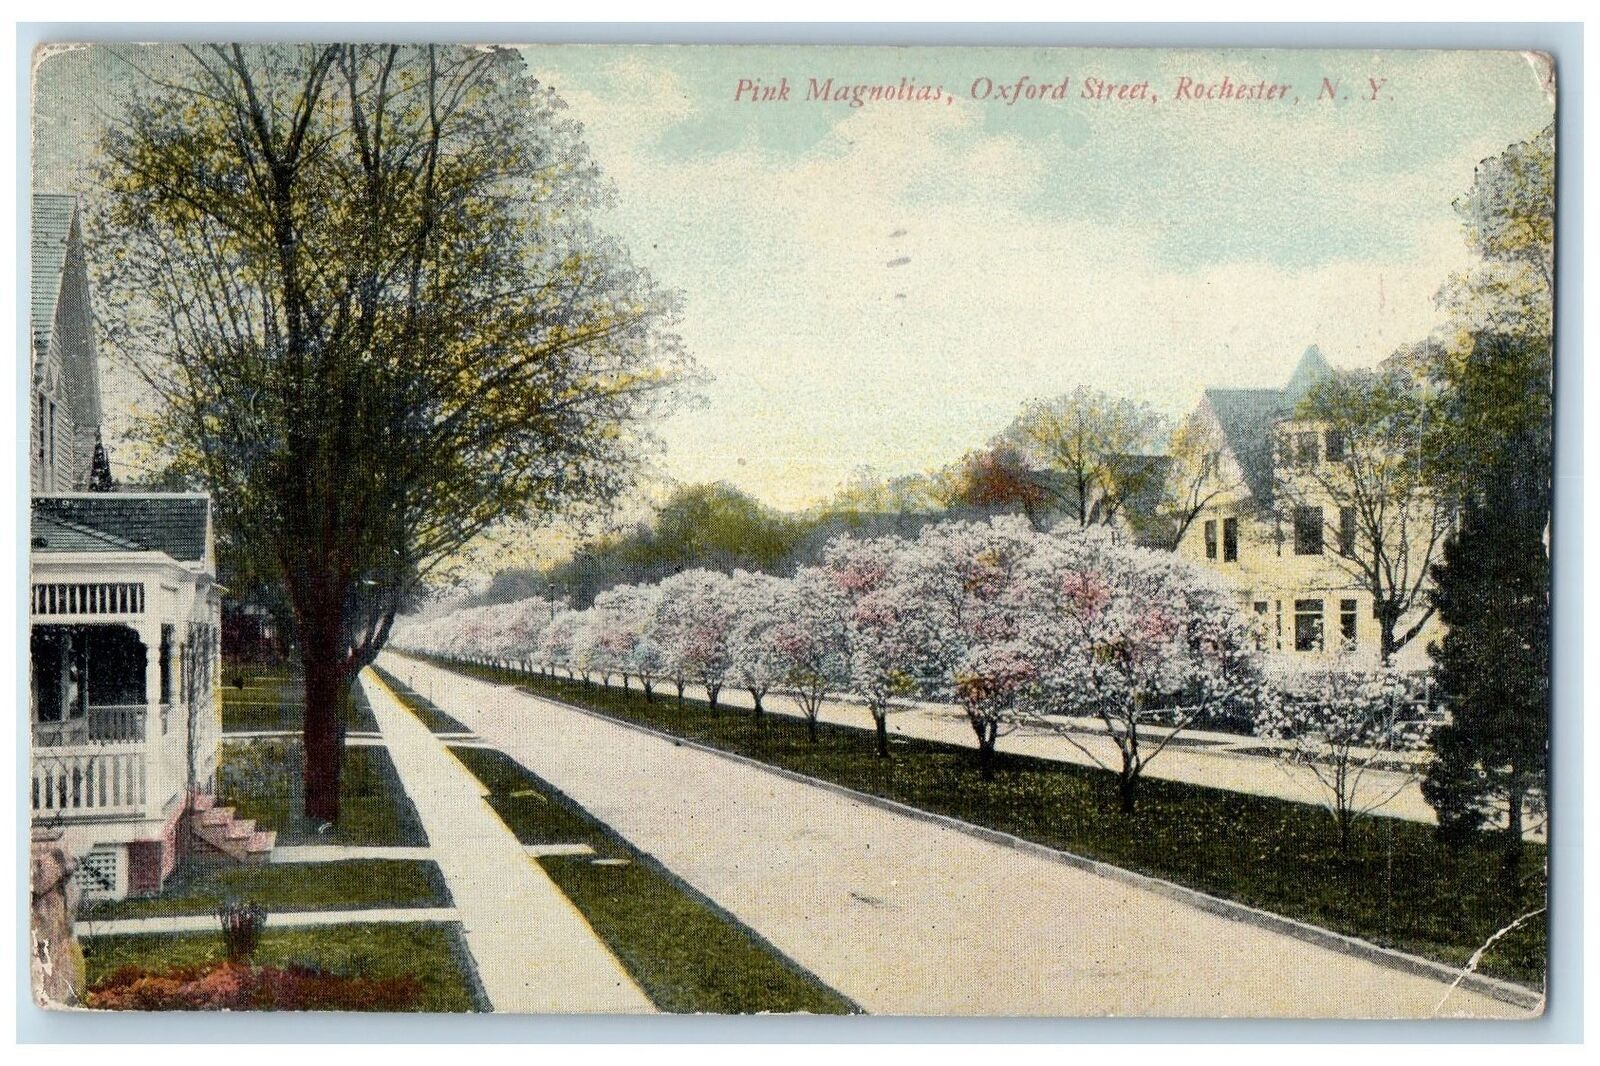 1912 Pink Magnolias Tree-lined Oxford St. Rochester New York NY Antique Postcard